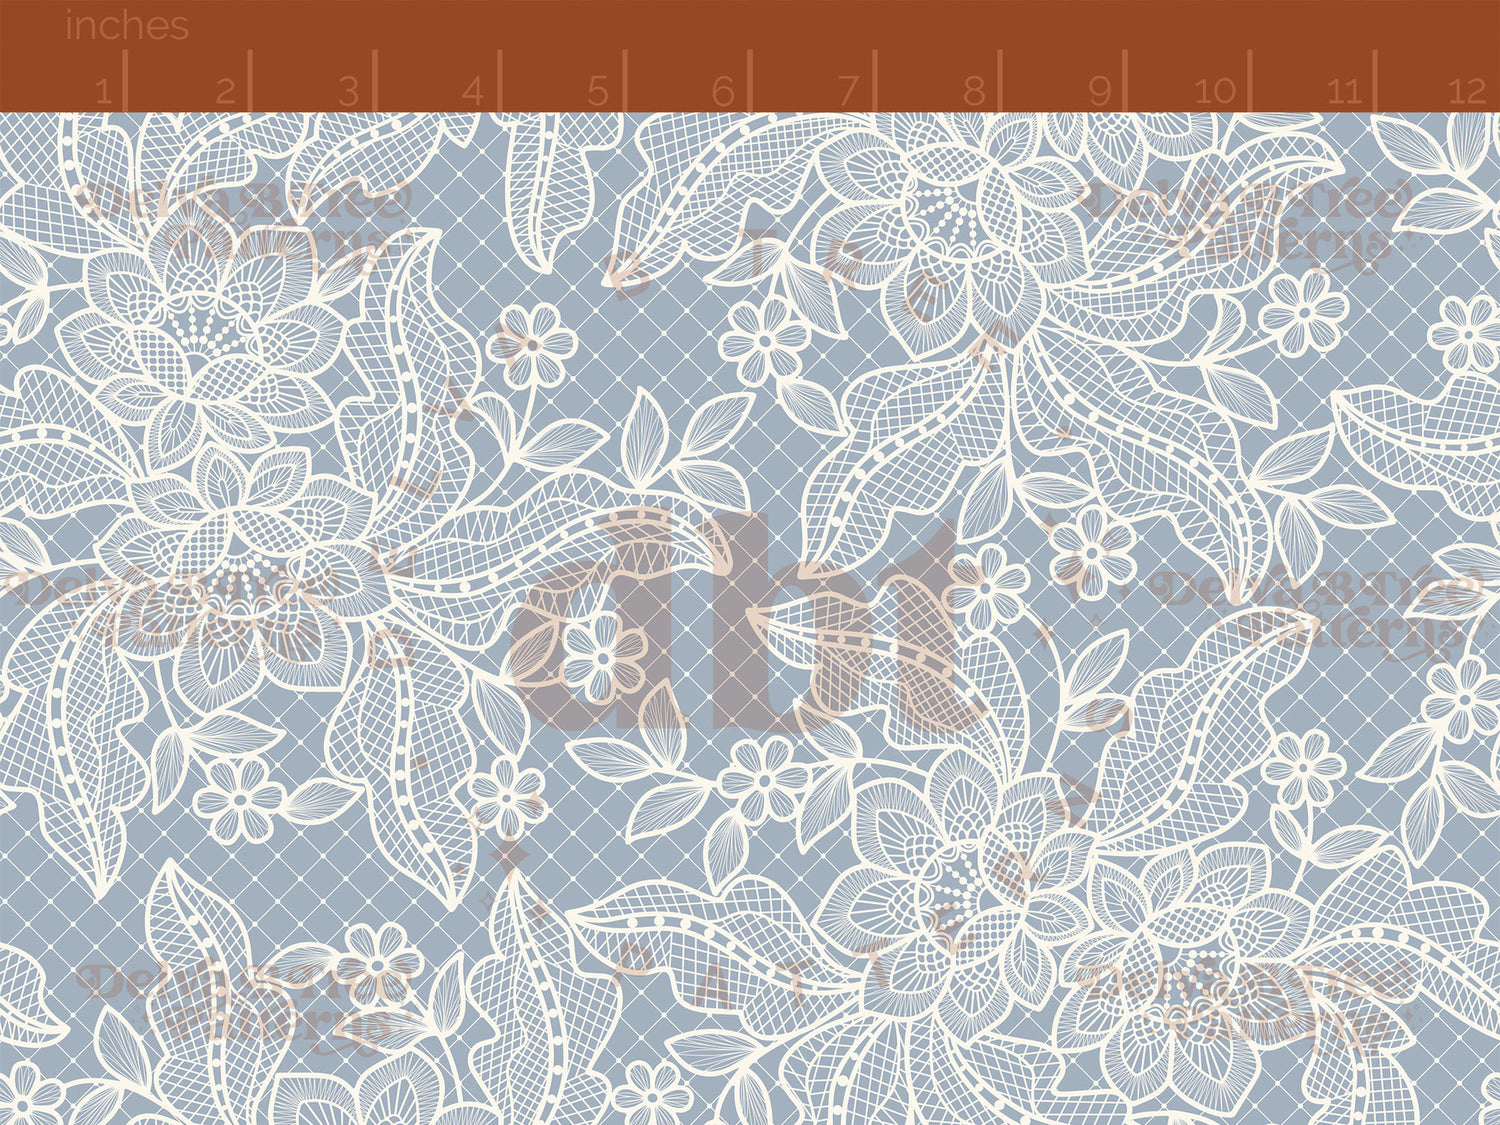 Off white flowers, leaves and faux lace netting on a cadet blue background seamless pattern scale digital file for small shops that make handmade products in small batches.